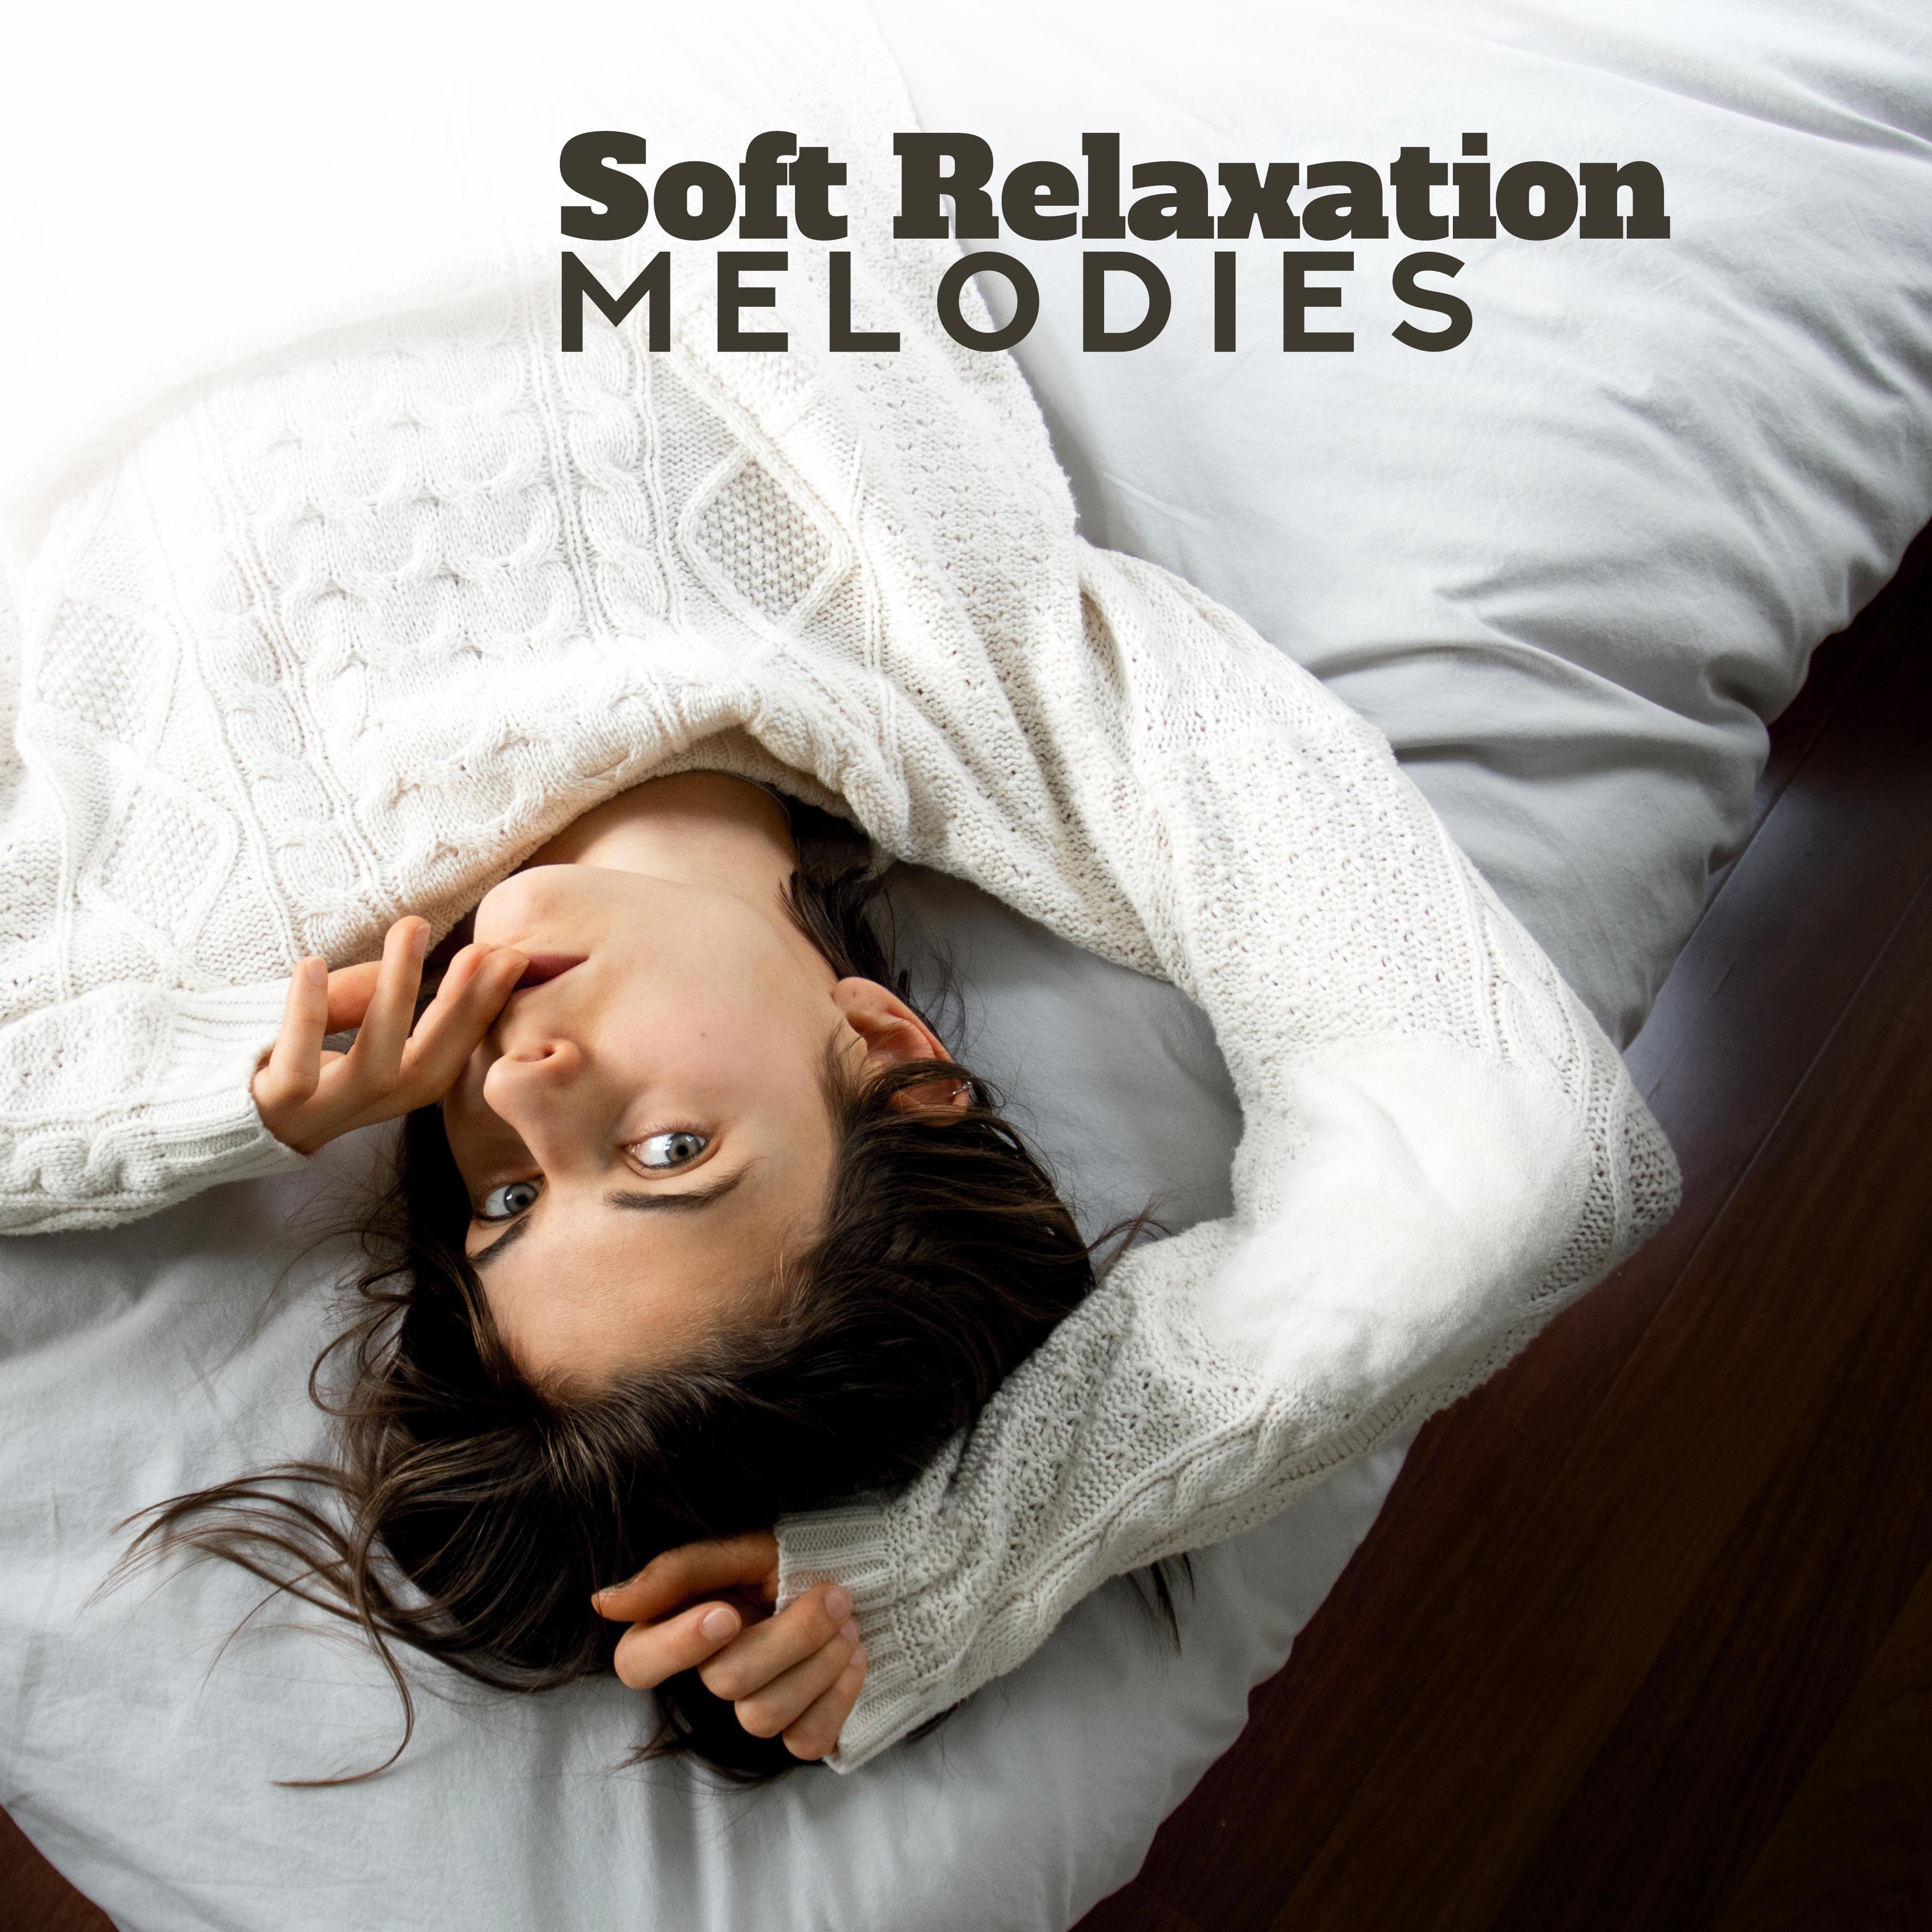 Soft Relaxation Melodies  Pure Chillout 2019, Music Therapy, Deep Relax, Soft Vibes, Deeper Sleep  Rest